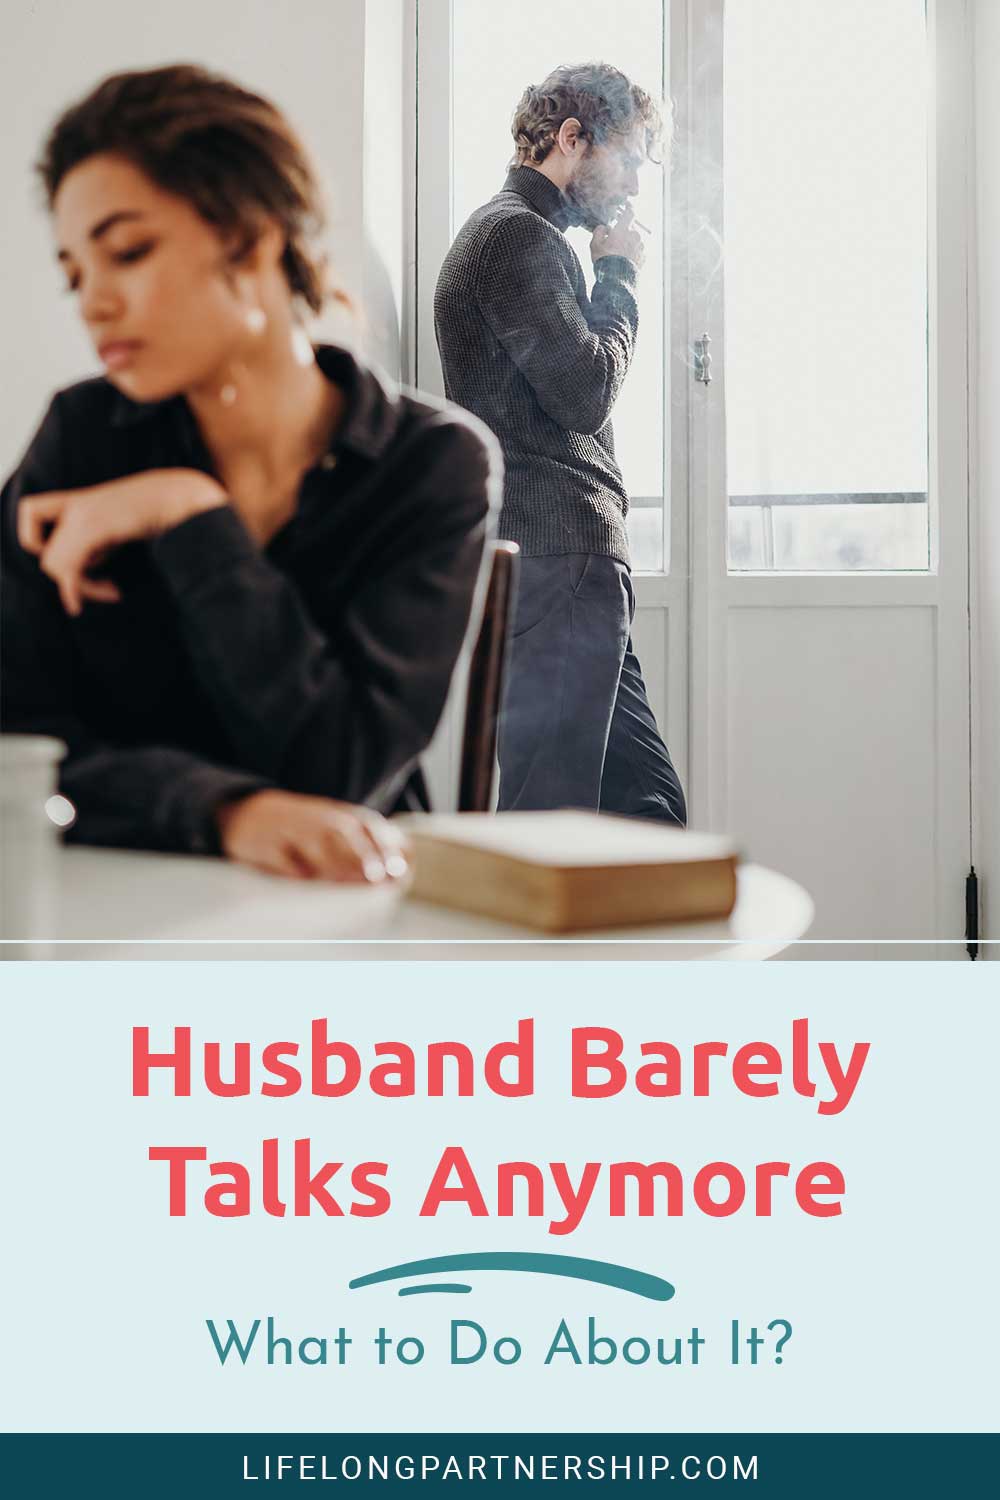 Husband Barely Talks Anymore – What to Do About It?